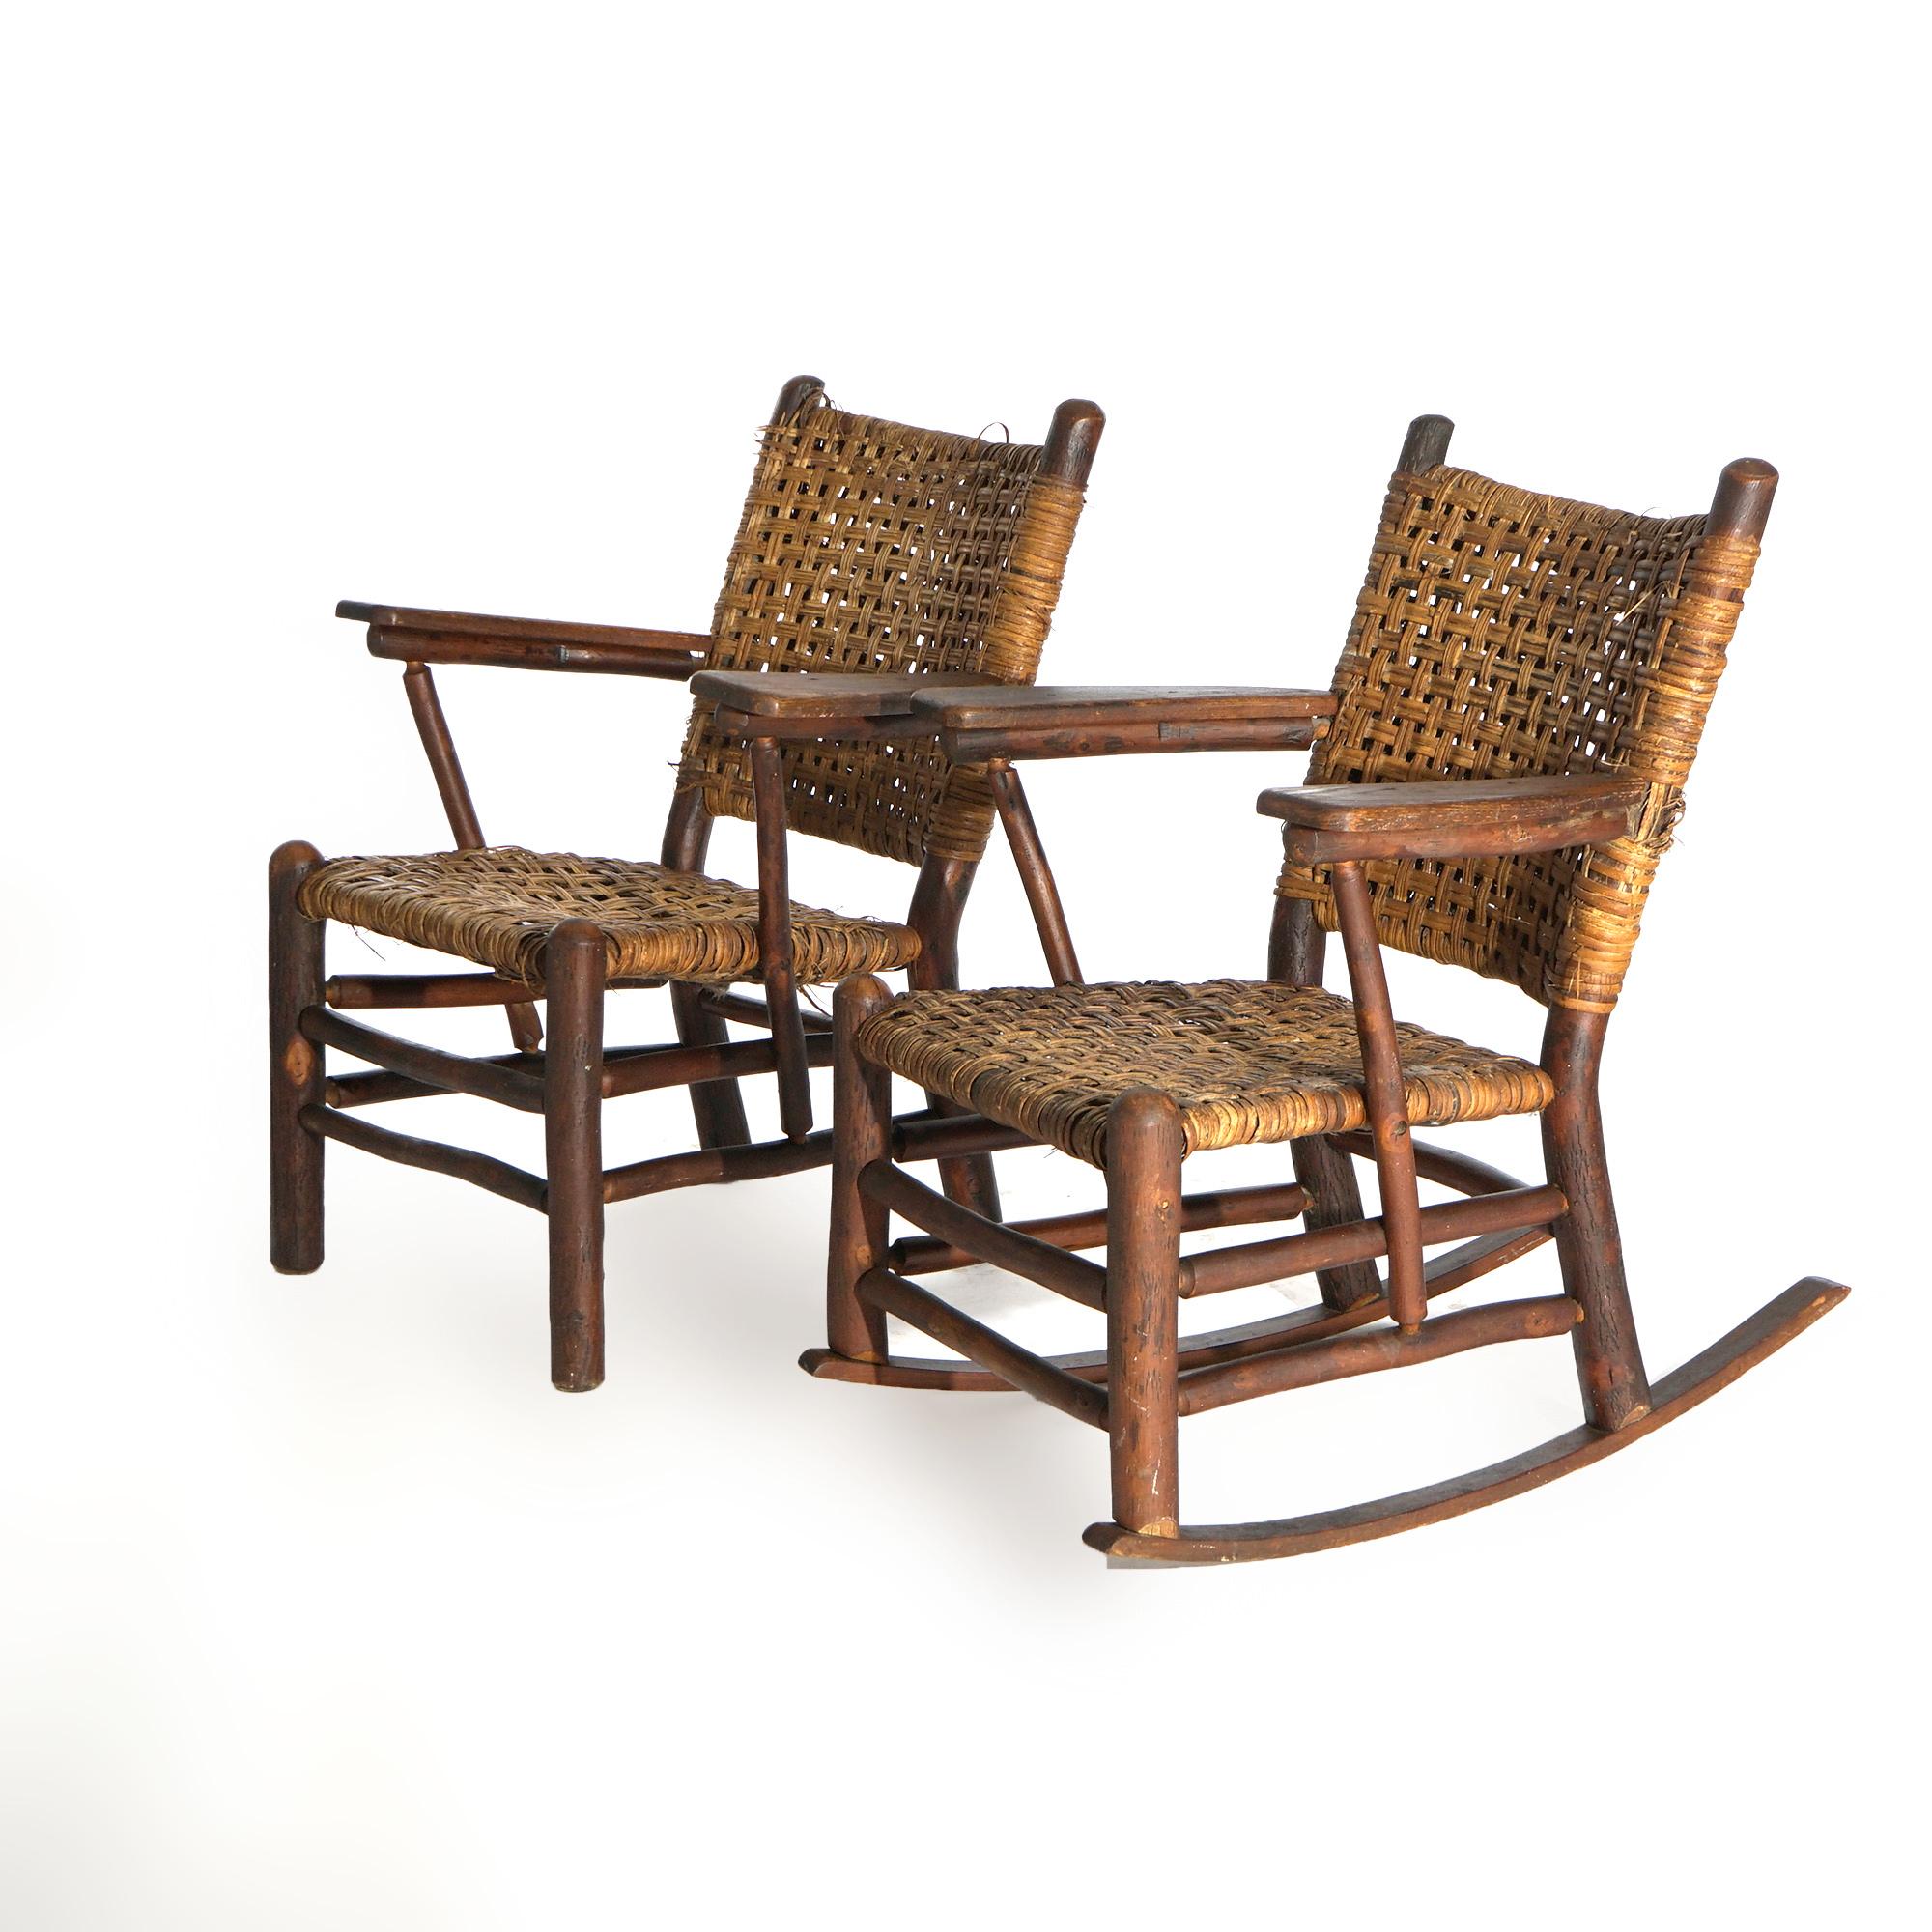 An antique Adirondack Old Hickory armchair and rocking chair offer stick form construction with woven rush seats and backs, c1920

Measures- chair 34.5''H x 29.5''W x 28.75''D; rocker 35.5''H x 28.5''W x 33.5''D.

*Ask about DISCOUNTED DELIVERY